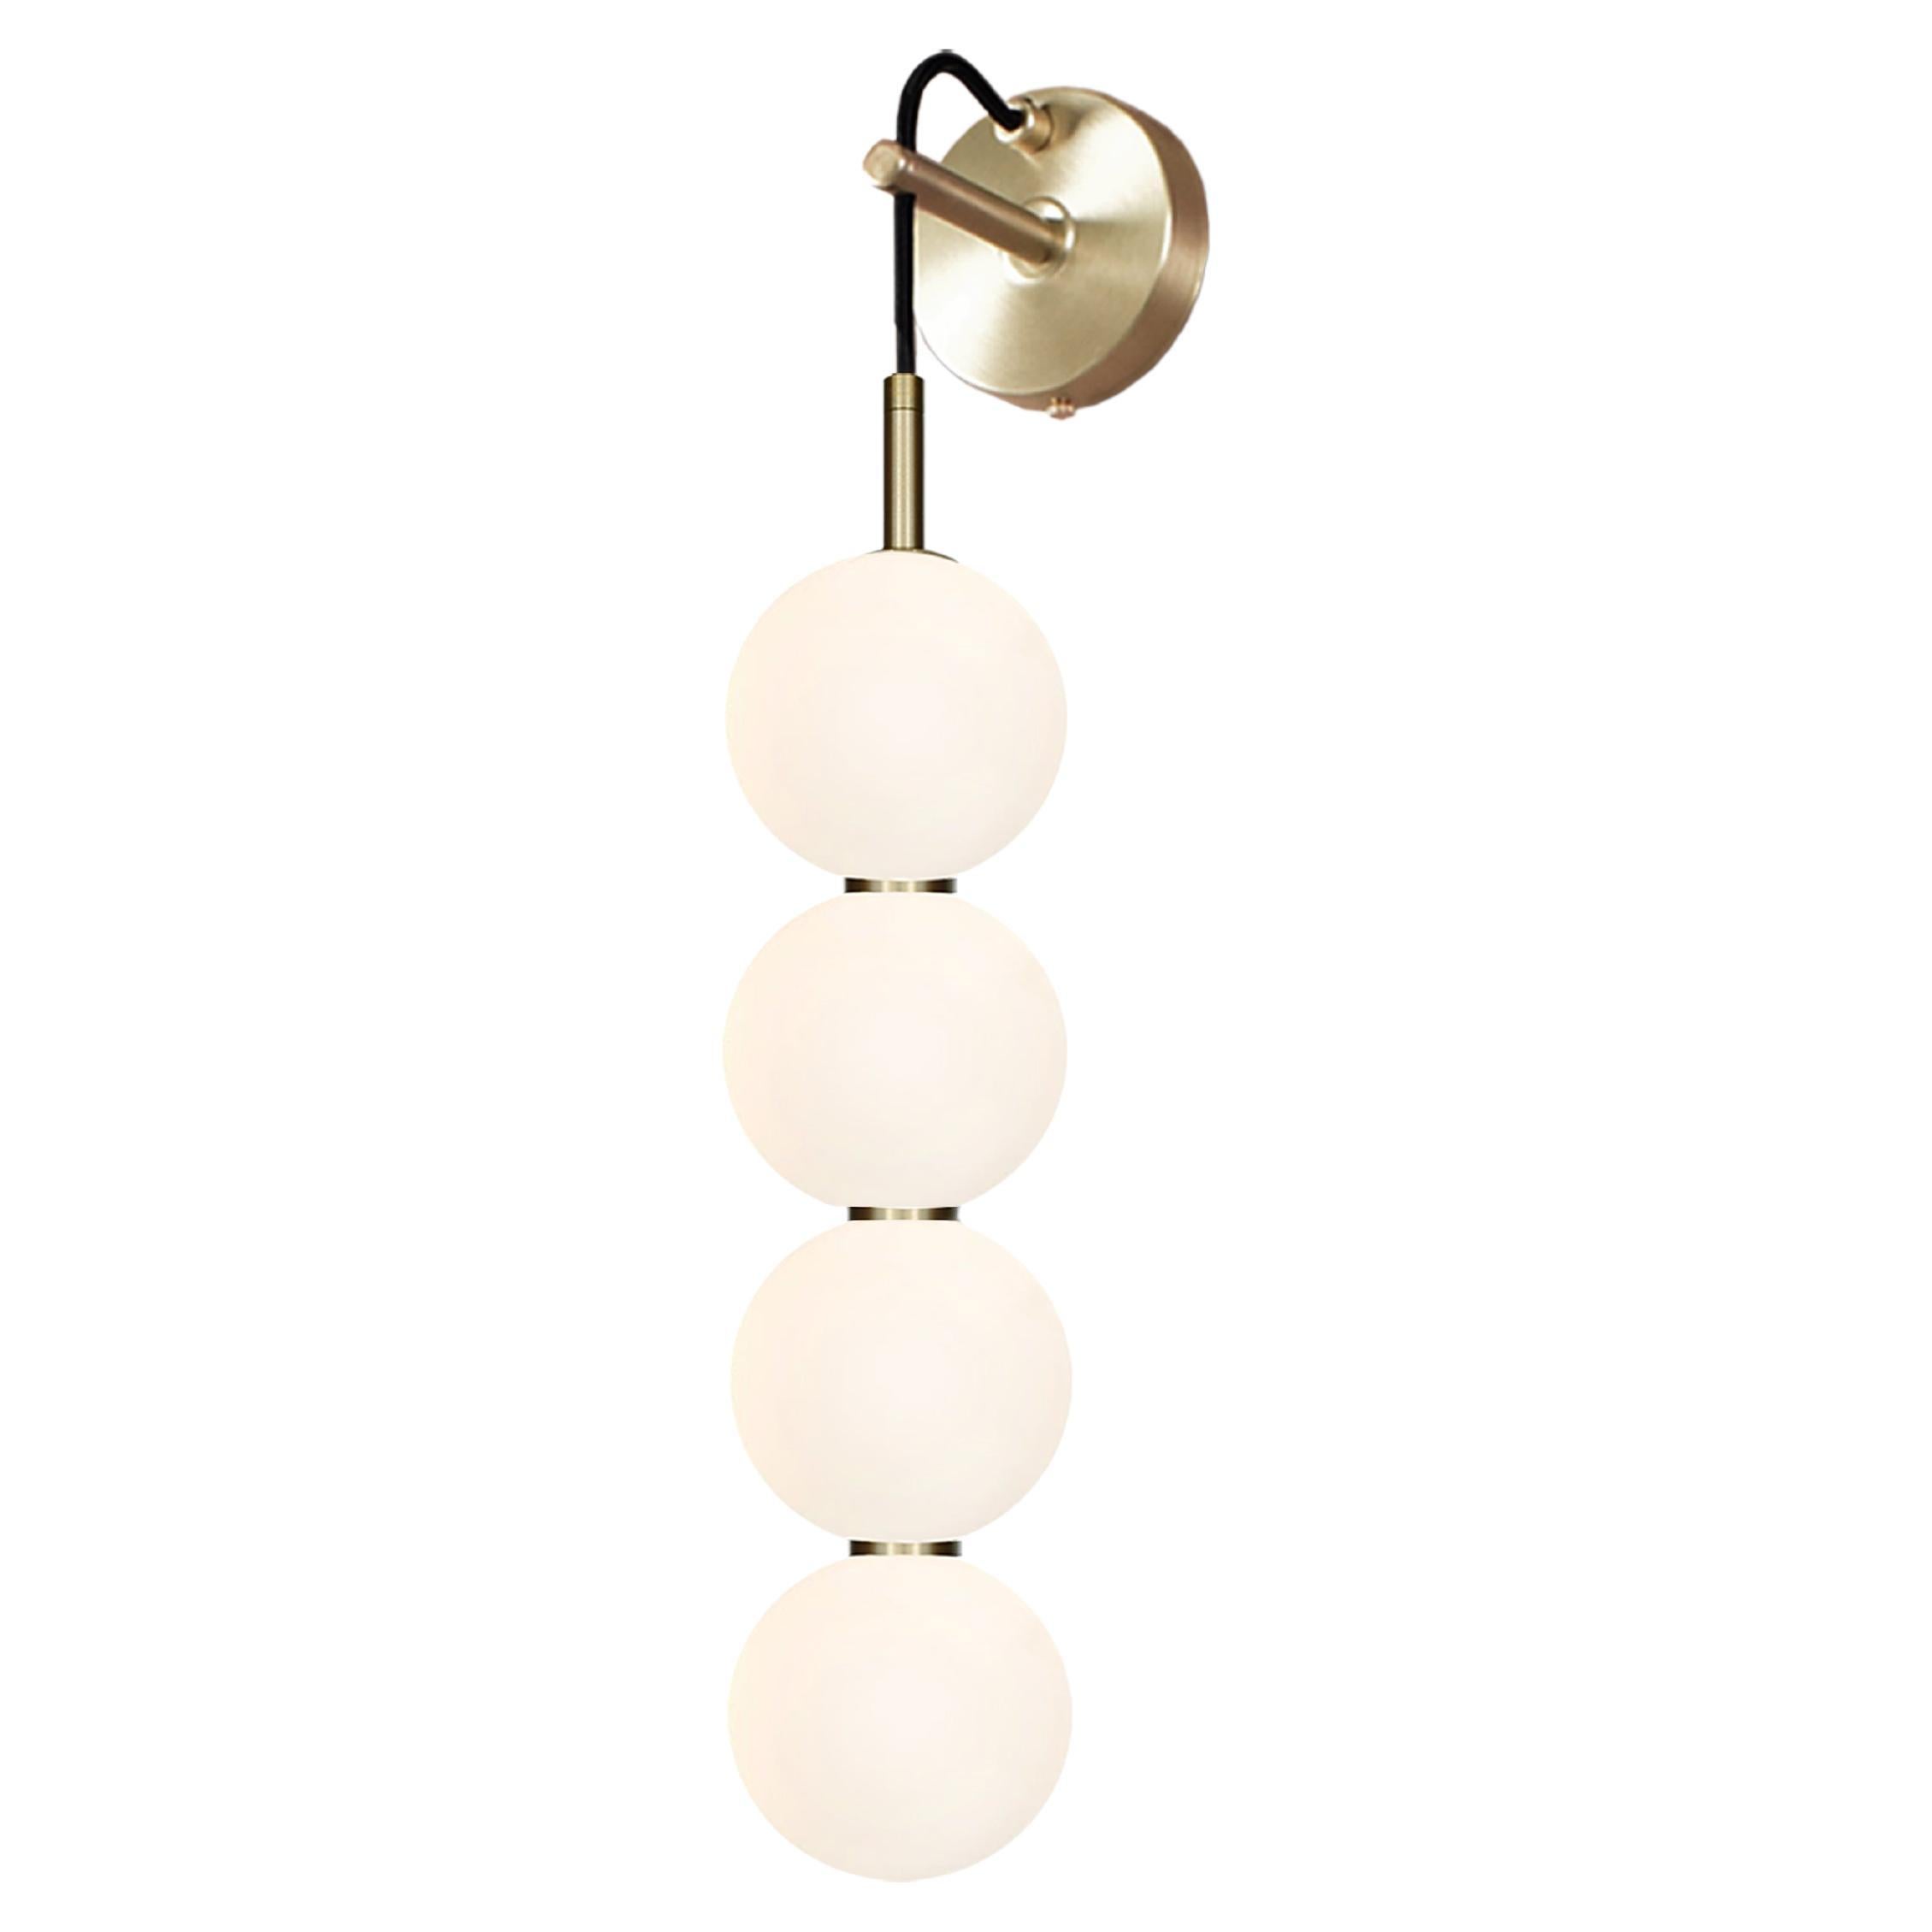 Echo Wall Lamp - 4 Ball. Opal Glass Orbs, Brass Metalwork. Integrated LED For Sale